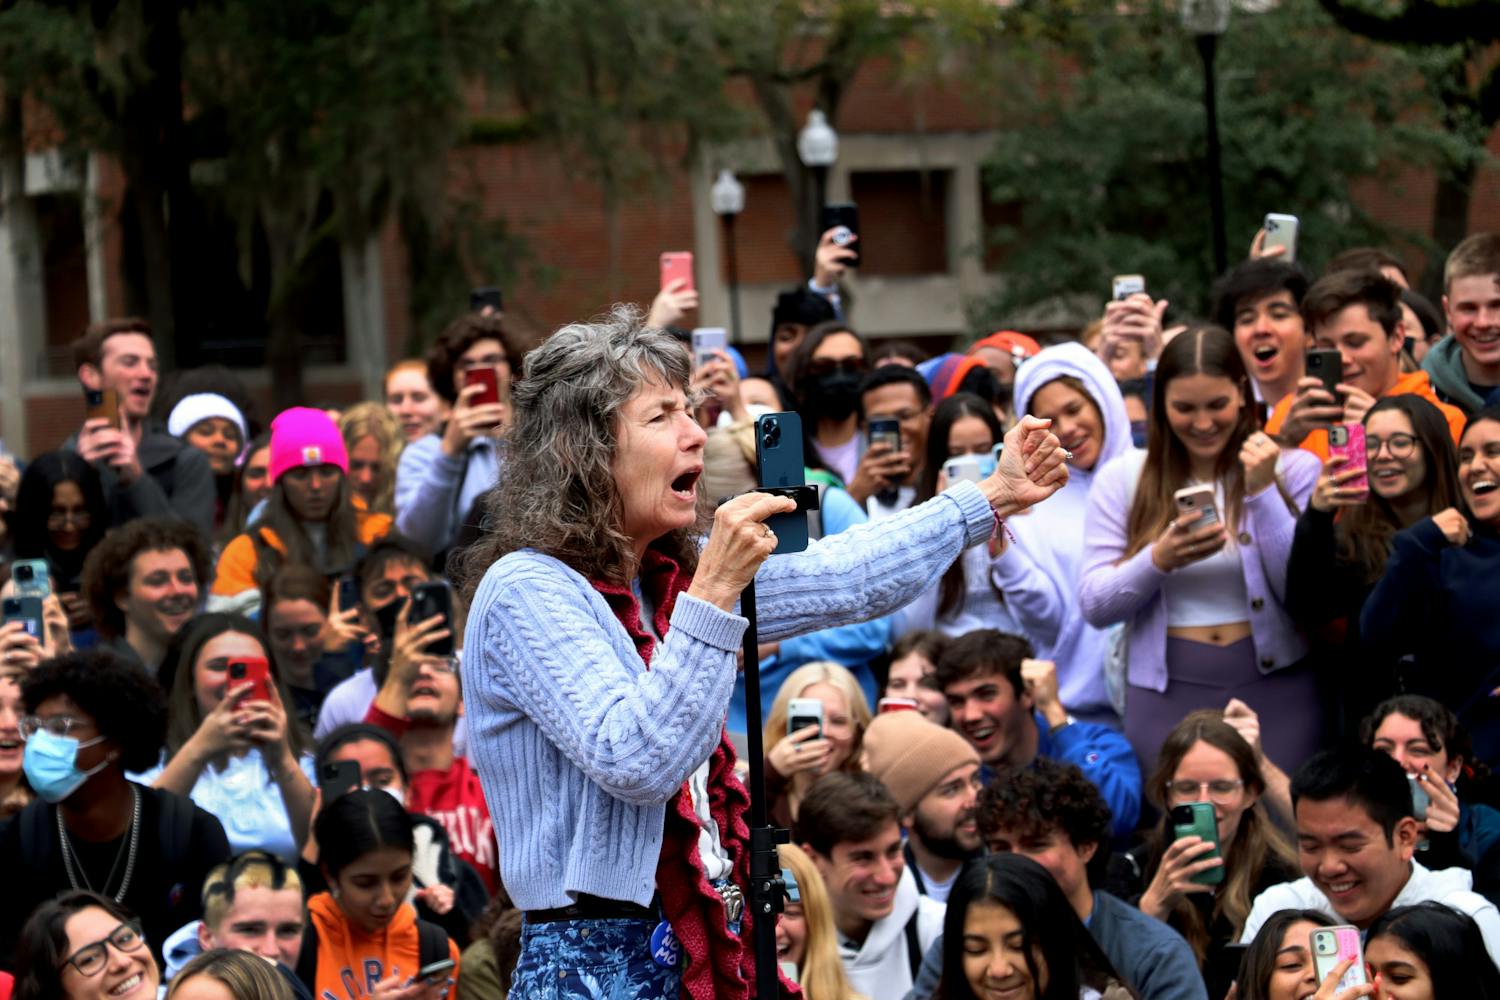 Cindy Lasseter Smock, better known to her more than 500,000 TikTok followers as “Sister Cindy,” came to Plaza of the Americas on Monday, Feb. 7.
A former UF student from the ‘70s, Smock came with her husband George Edward “Jed” Smock Jr., who she said converted her when she was a student.&nbsp;
A viral sensation, Smock was met with a crowd of over 500 students that dwindled throughout the day. She said on her TikTok that she will be at UF until Wednesday, Feb. 9.